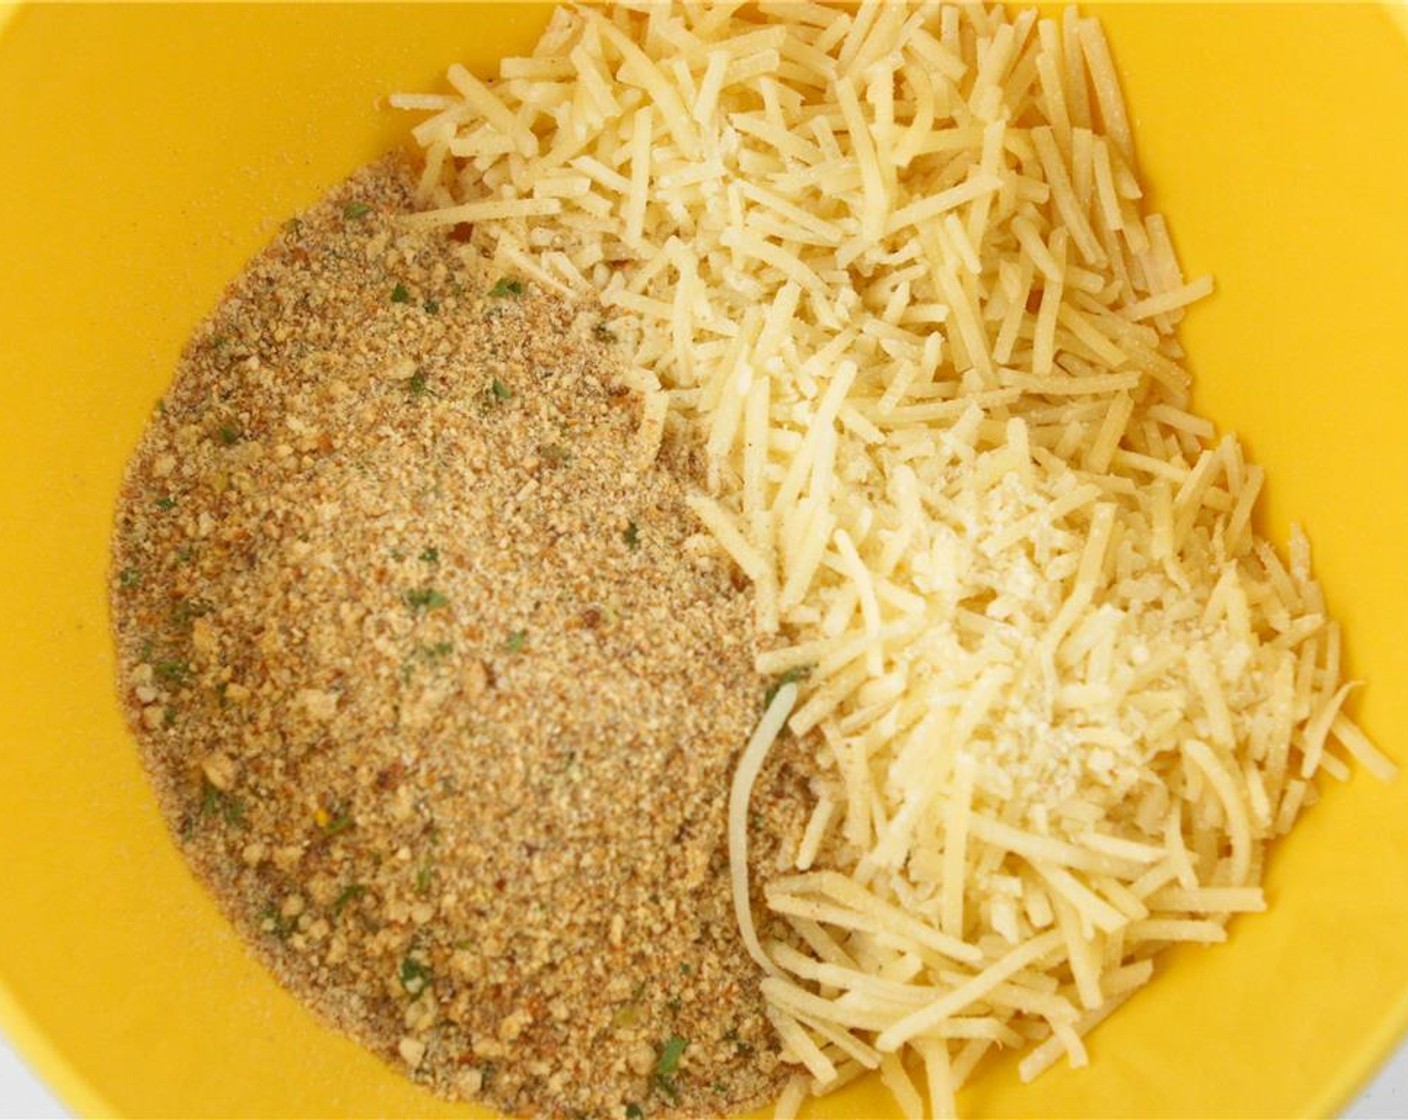 step 4 In a separate small bowl, combine the Seasoned Breadcrumbs (1/2 cup) and Shredded Parmesan Cheese (1/2 cup). Mix well.